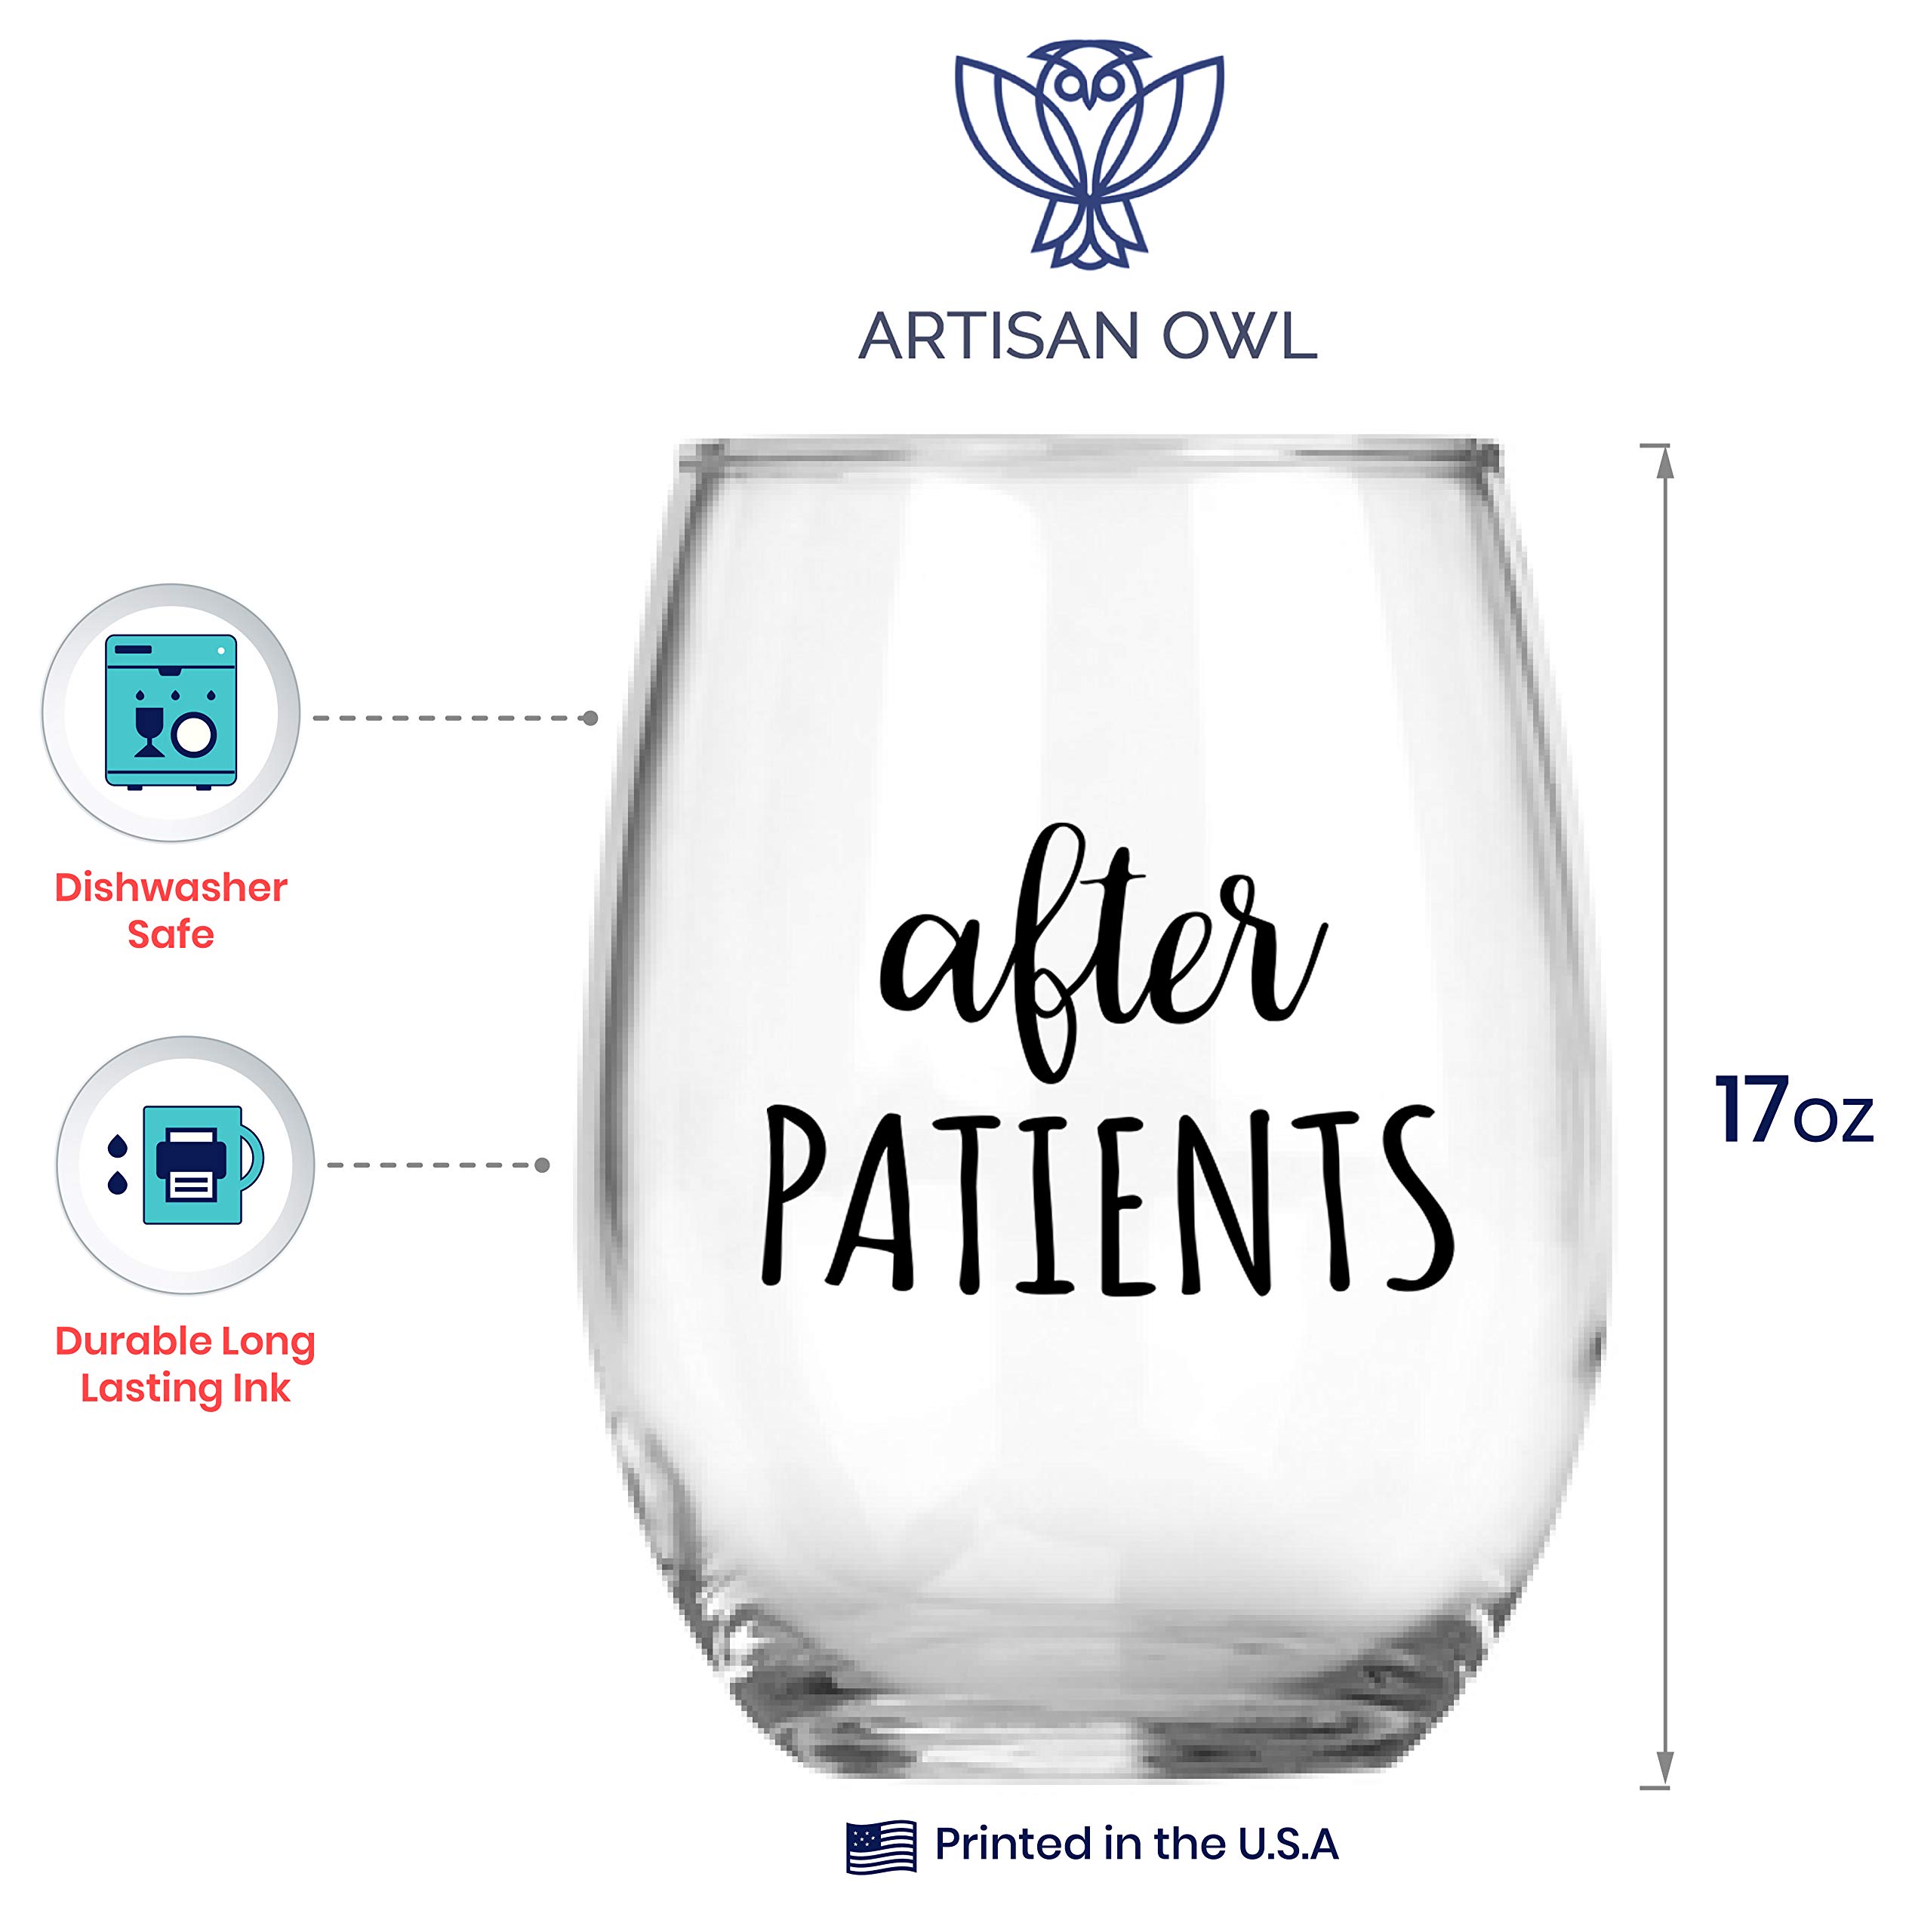 Artisan Owl Before Patients, After Patients SET - Set Contains: One (1) 15 oz Deluxe Large Double-Sided Mug and One (1) 17 oz Stemless Wine Glass